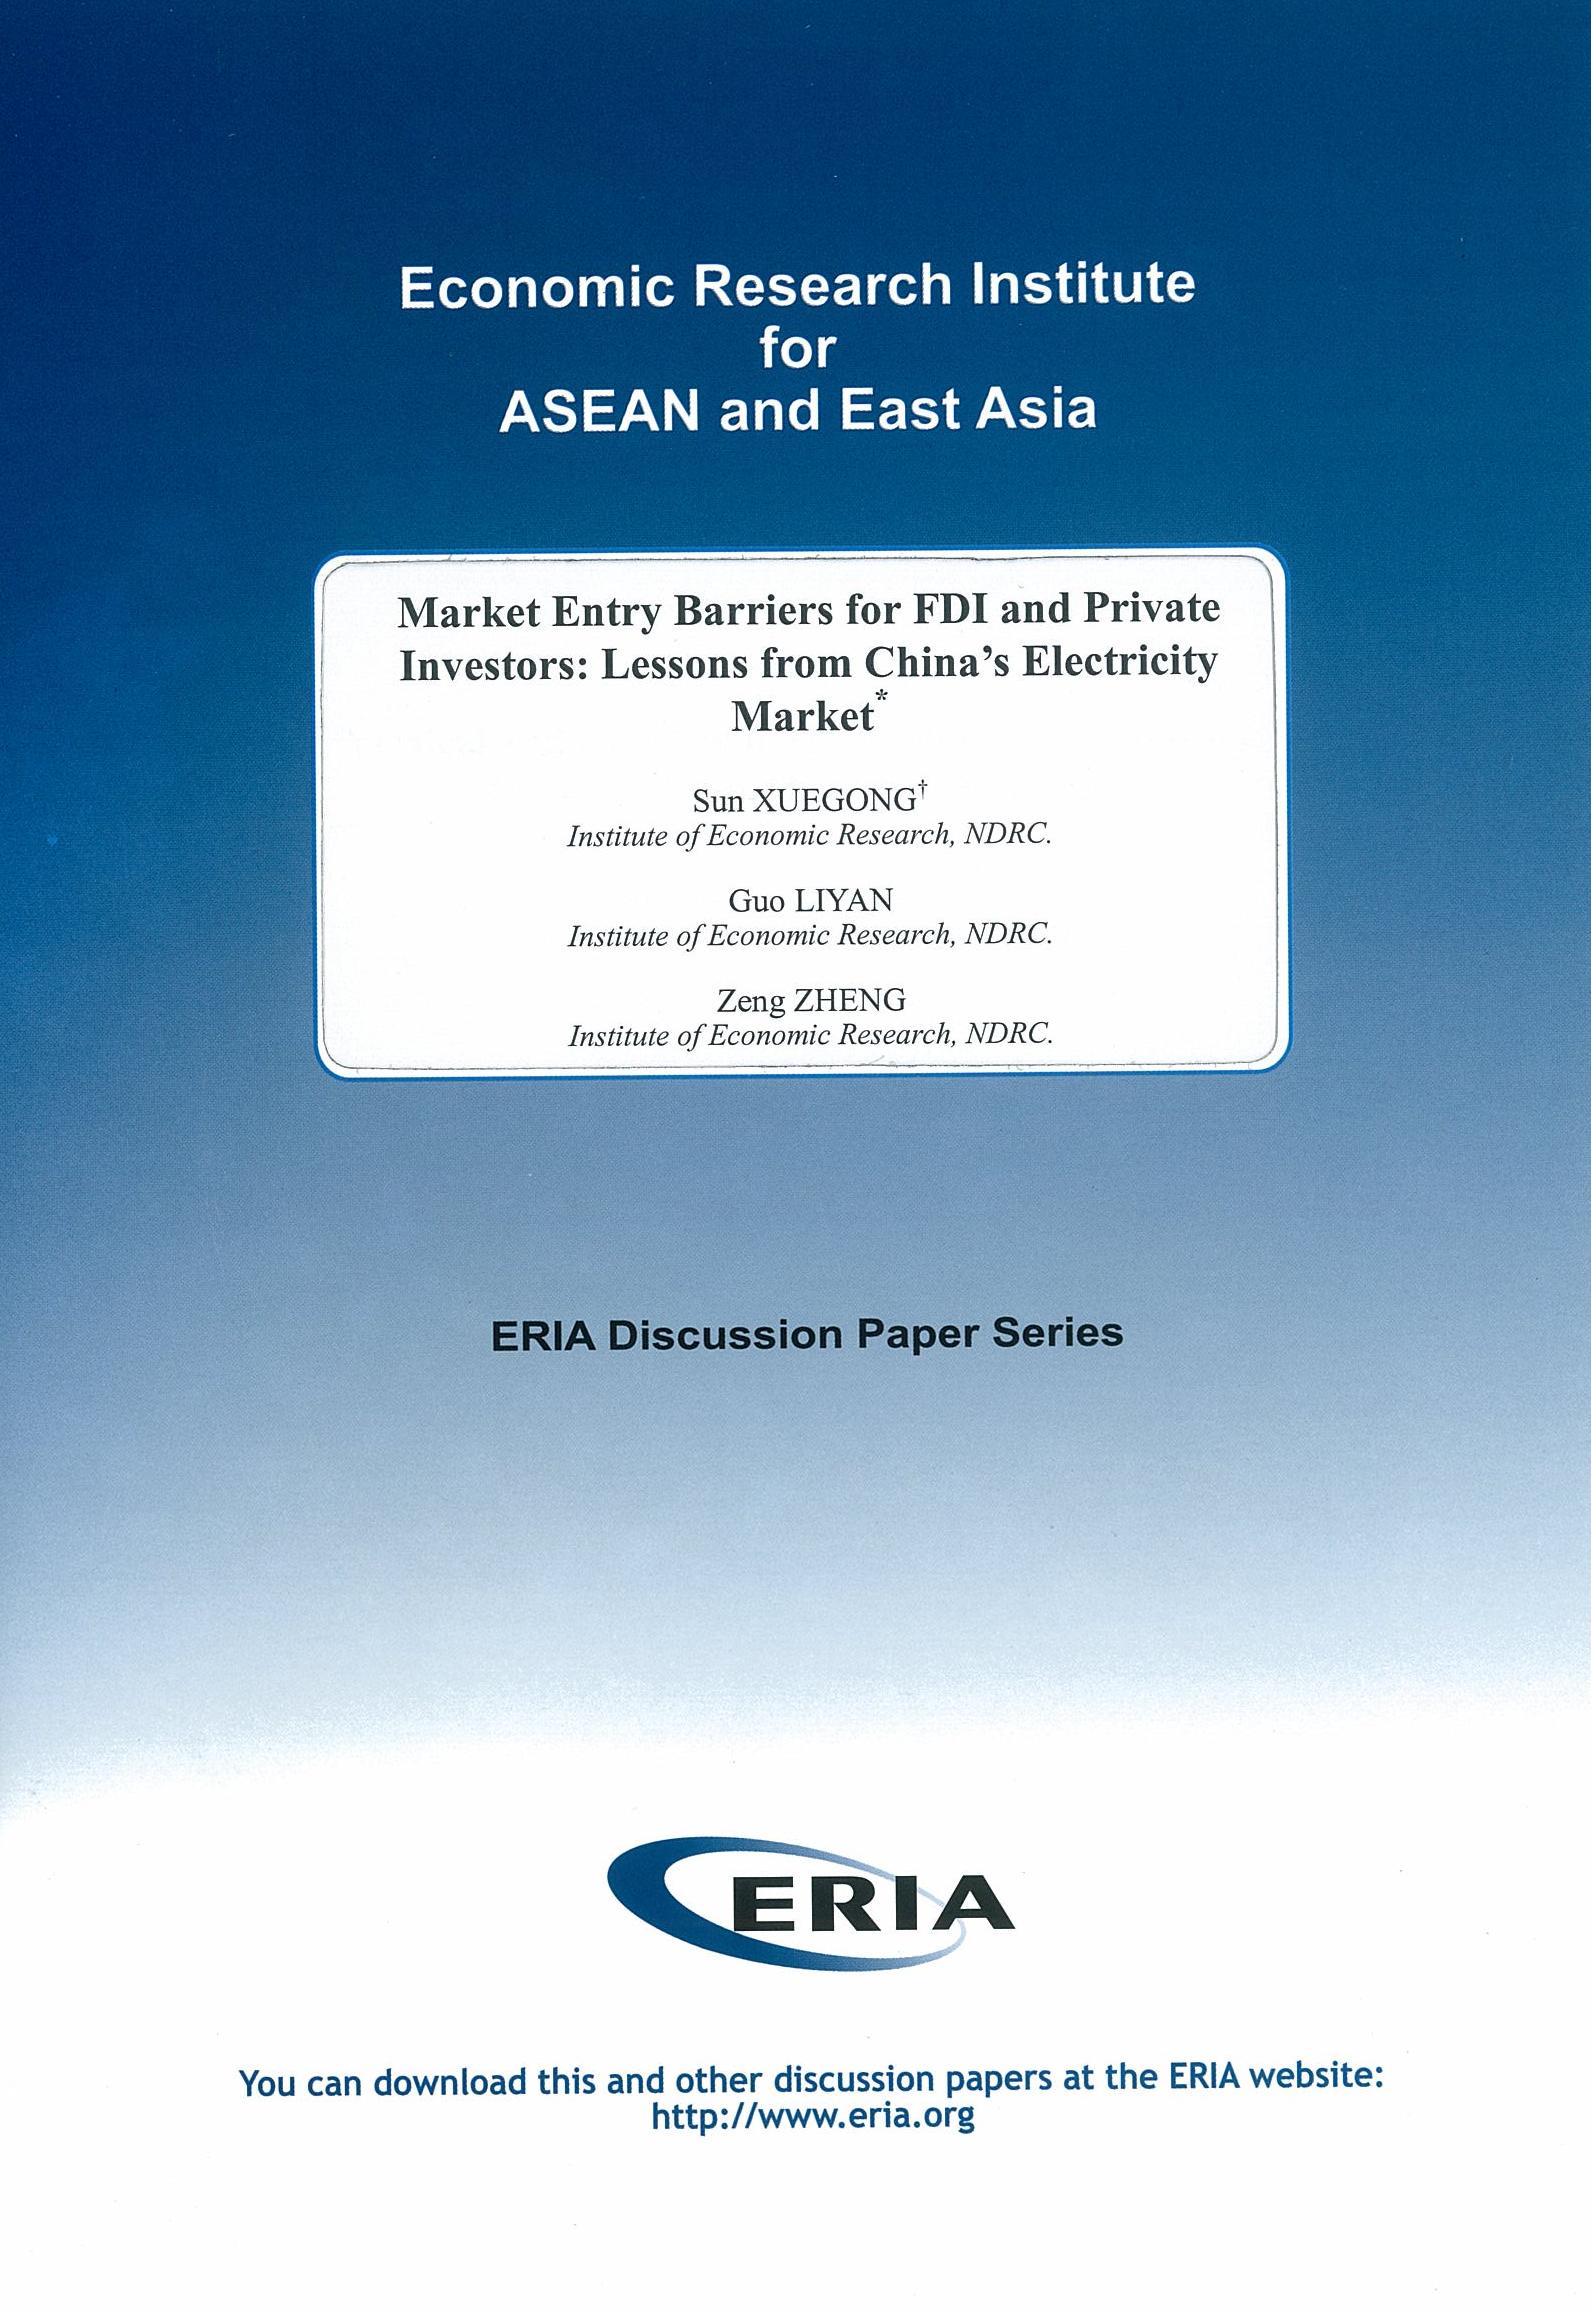 Market Entry Barriers for FDI and Private Investors: Lessons from China's Electricity Market